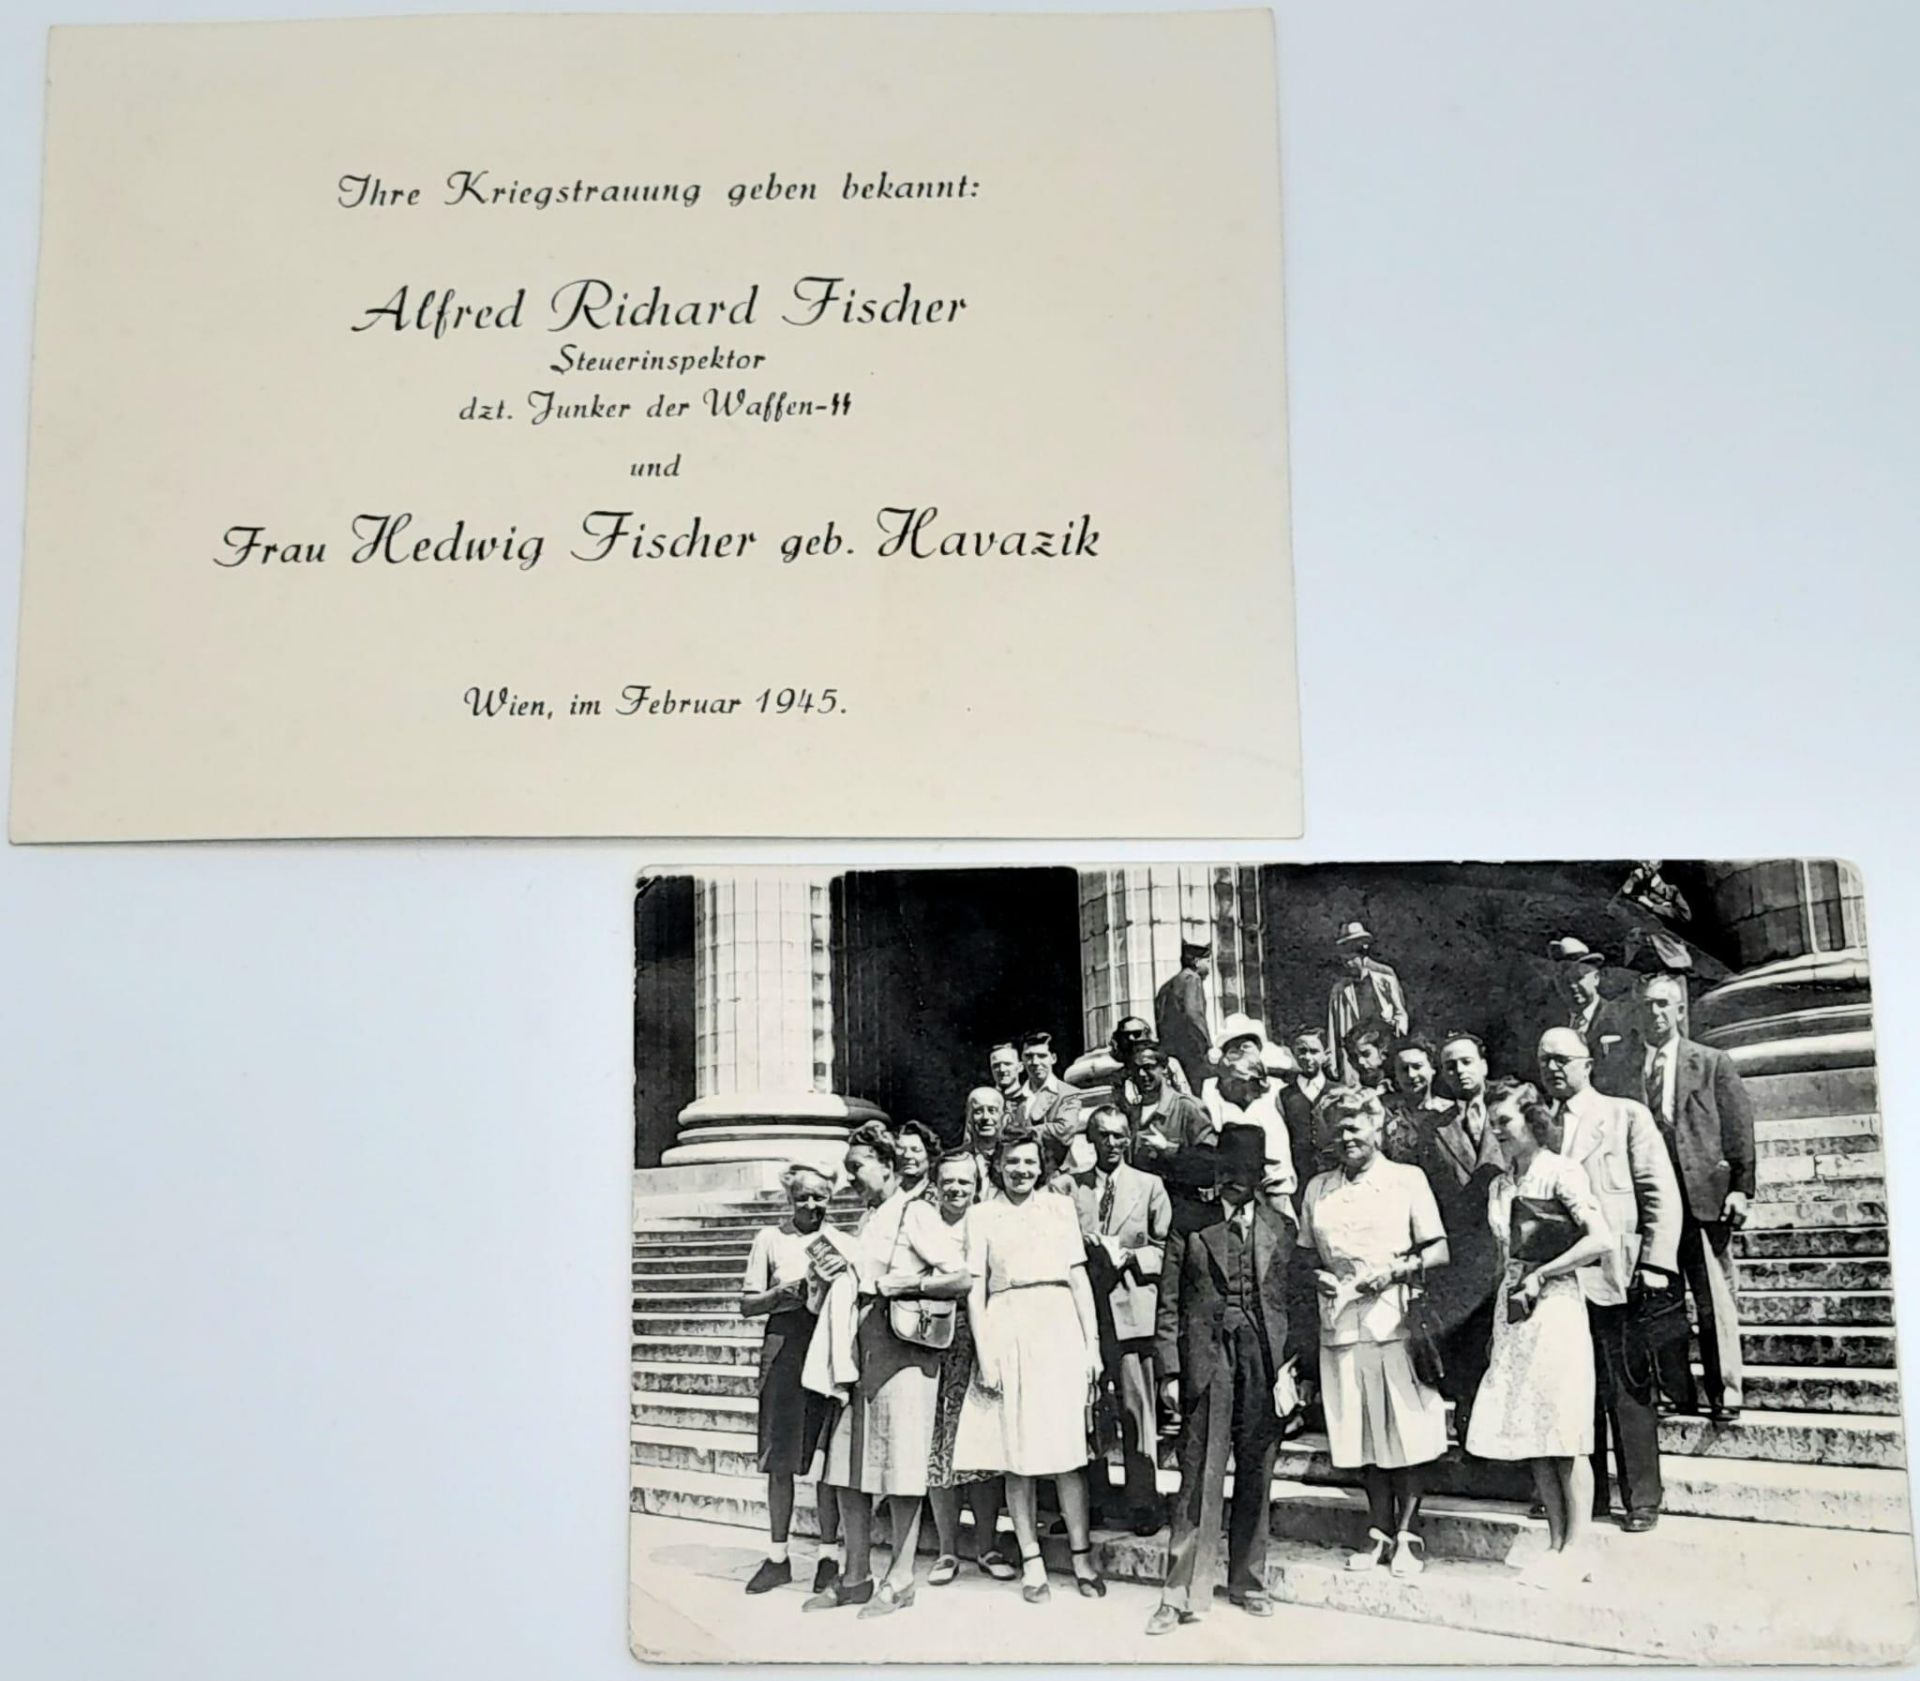 Wedding Announcement and Photograph for a Junker (Squire) working for the Waffen SS as an